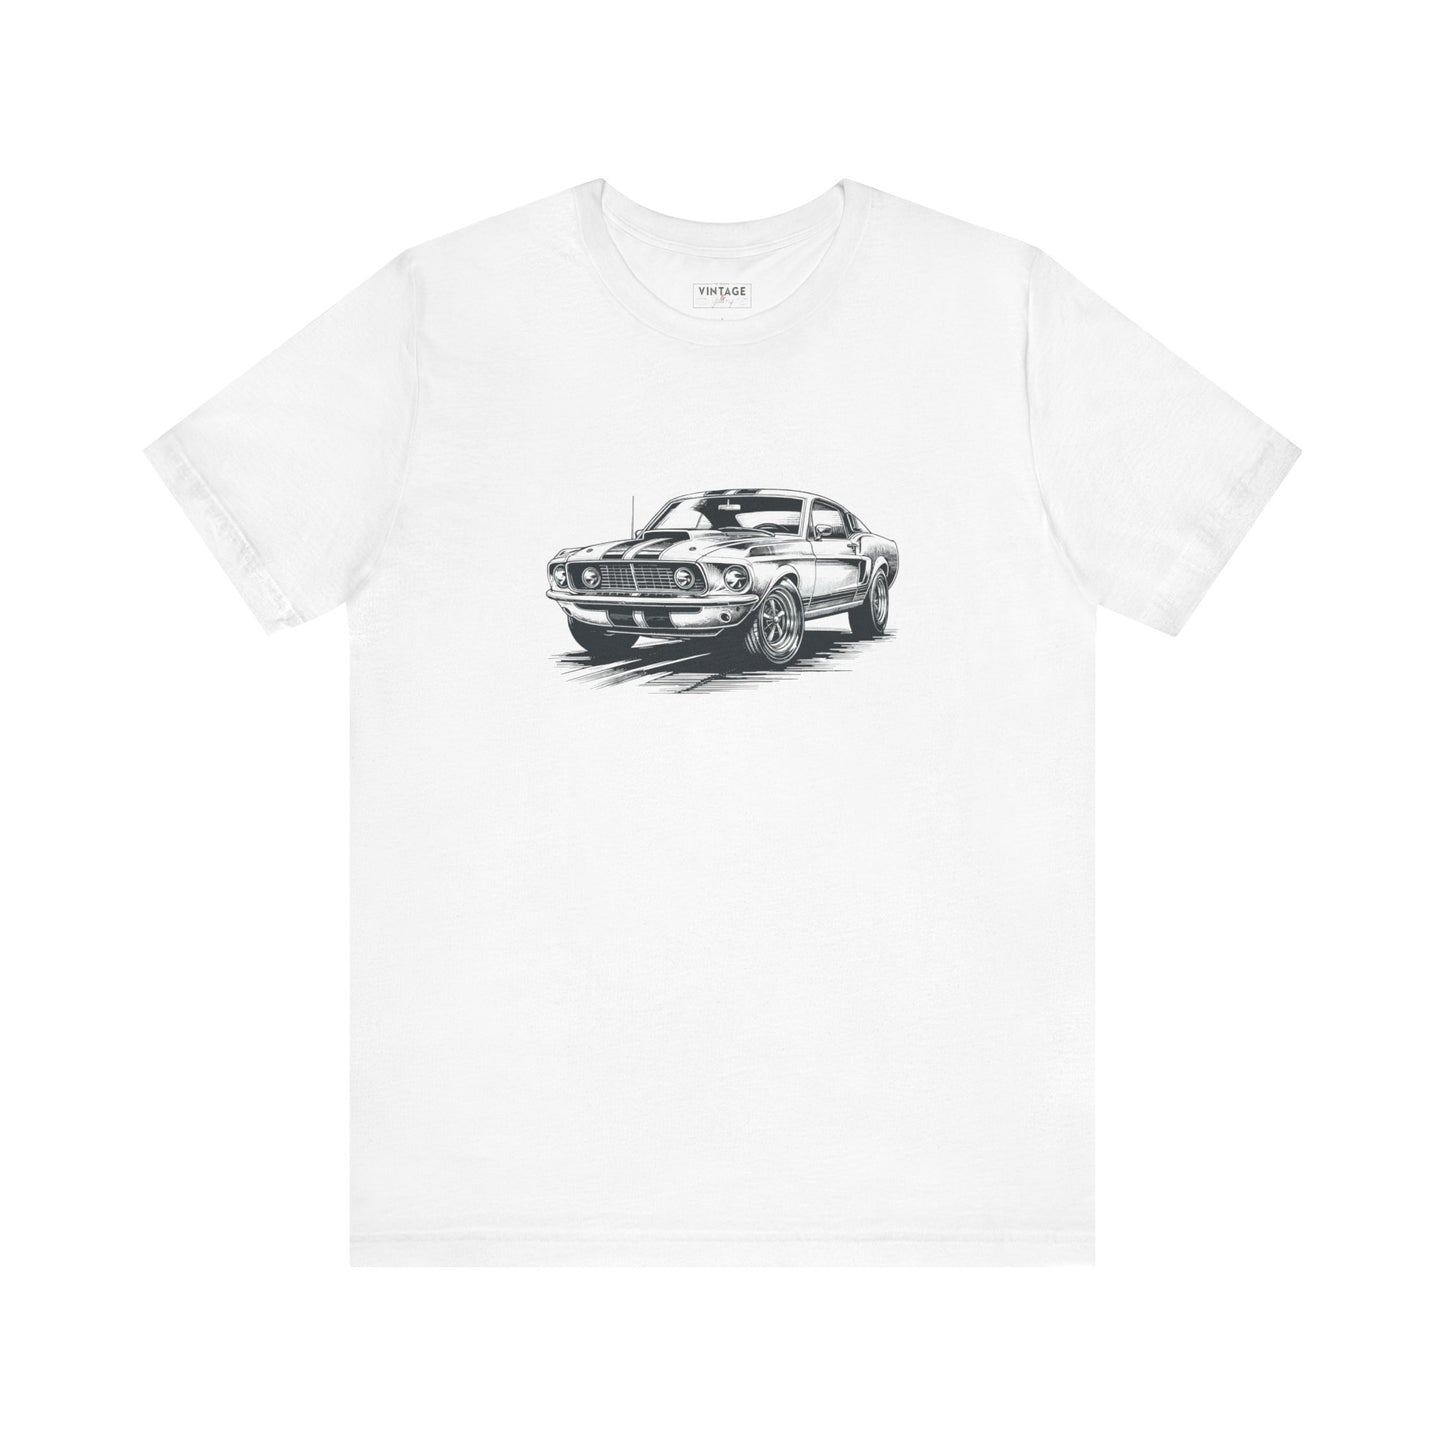 Vintage Mustang Hand-Drawn Style T-Shirt